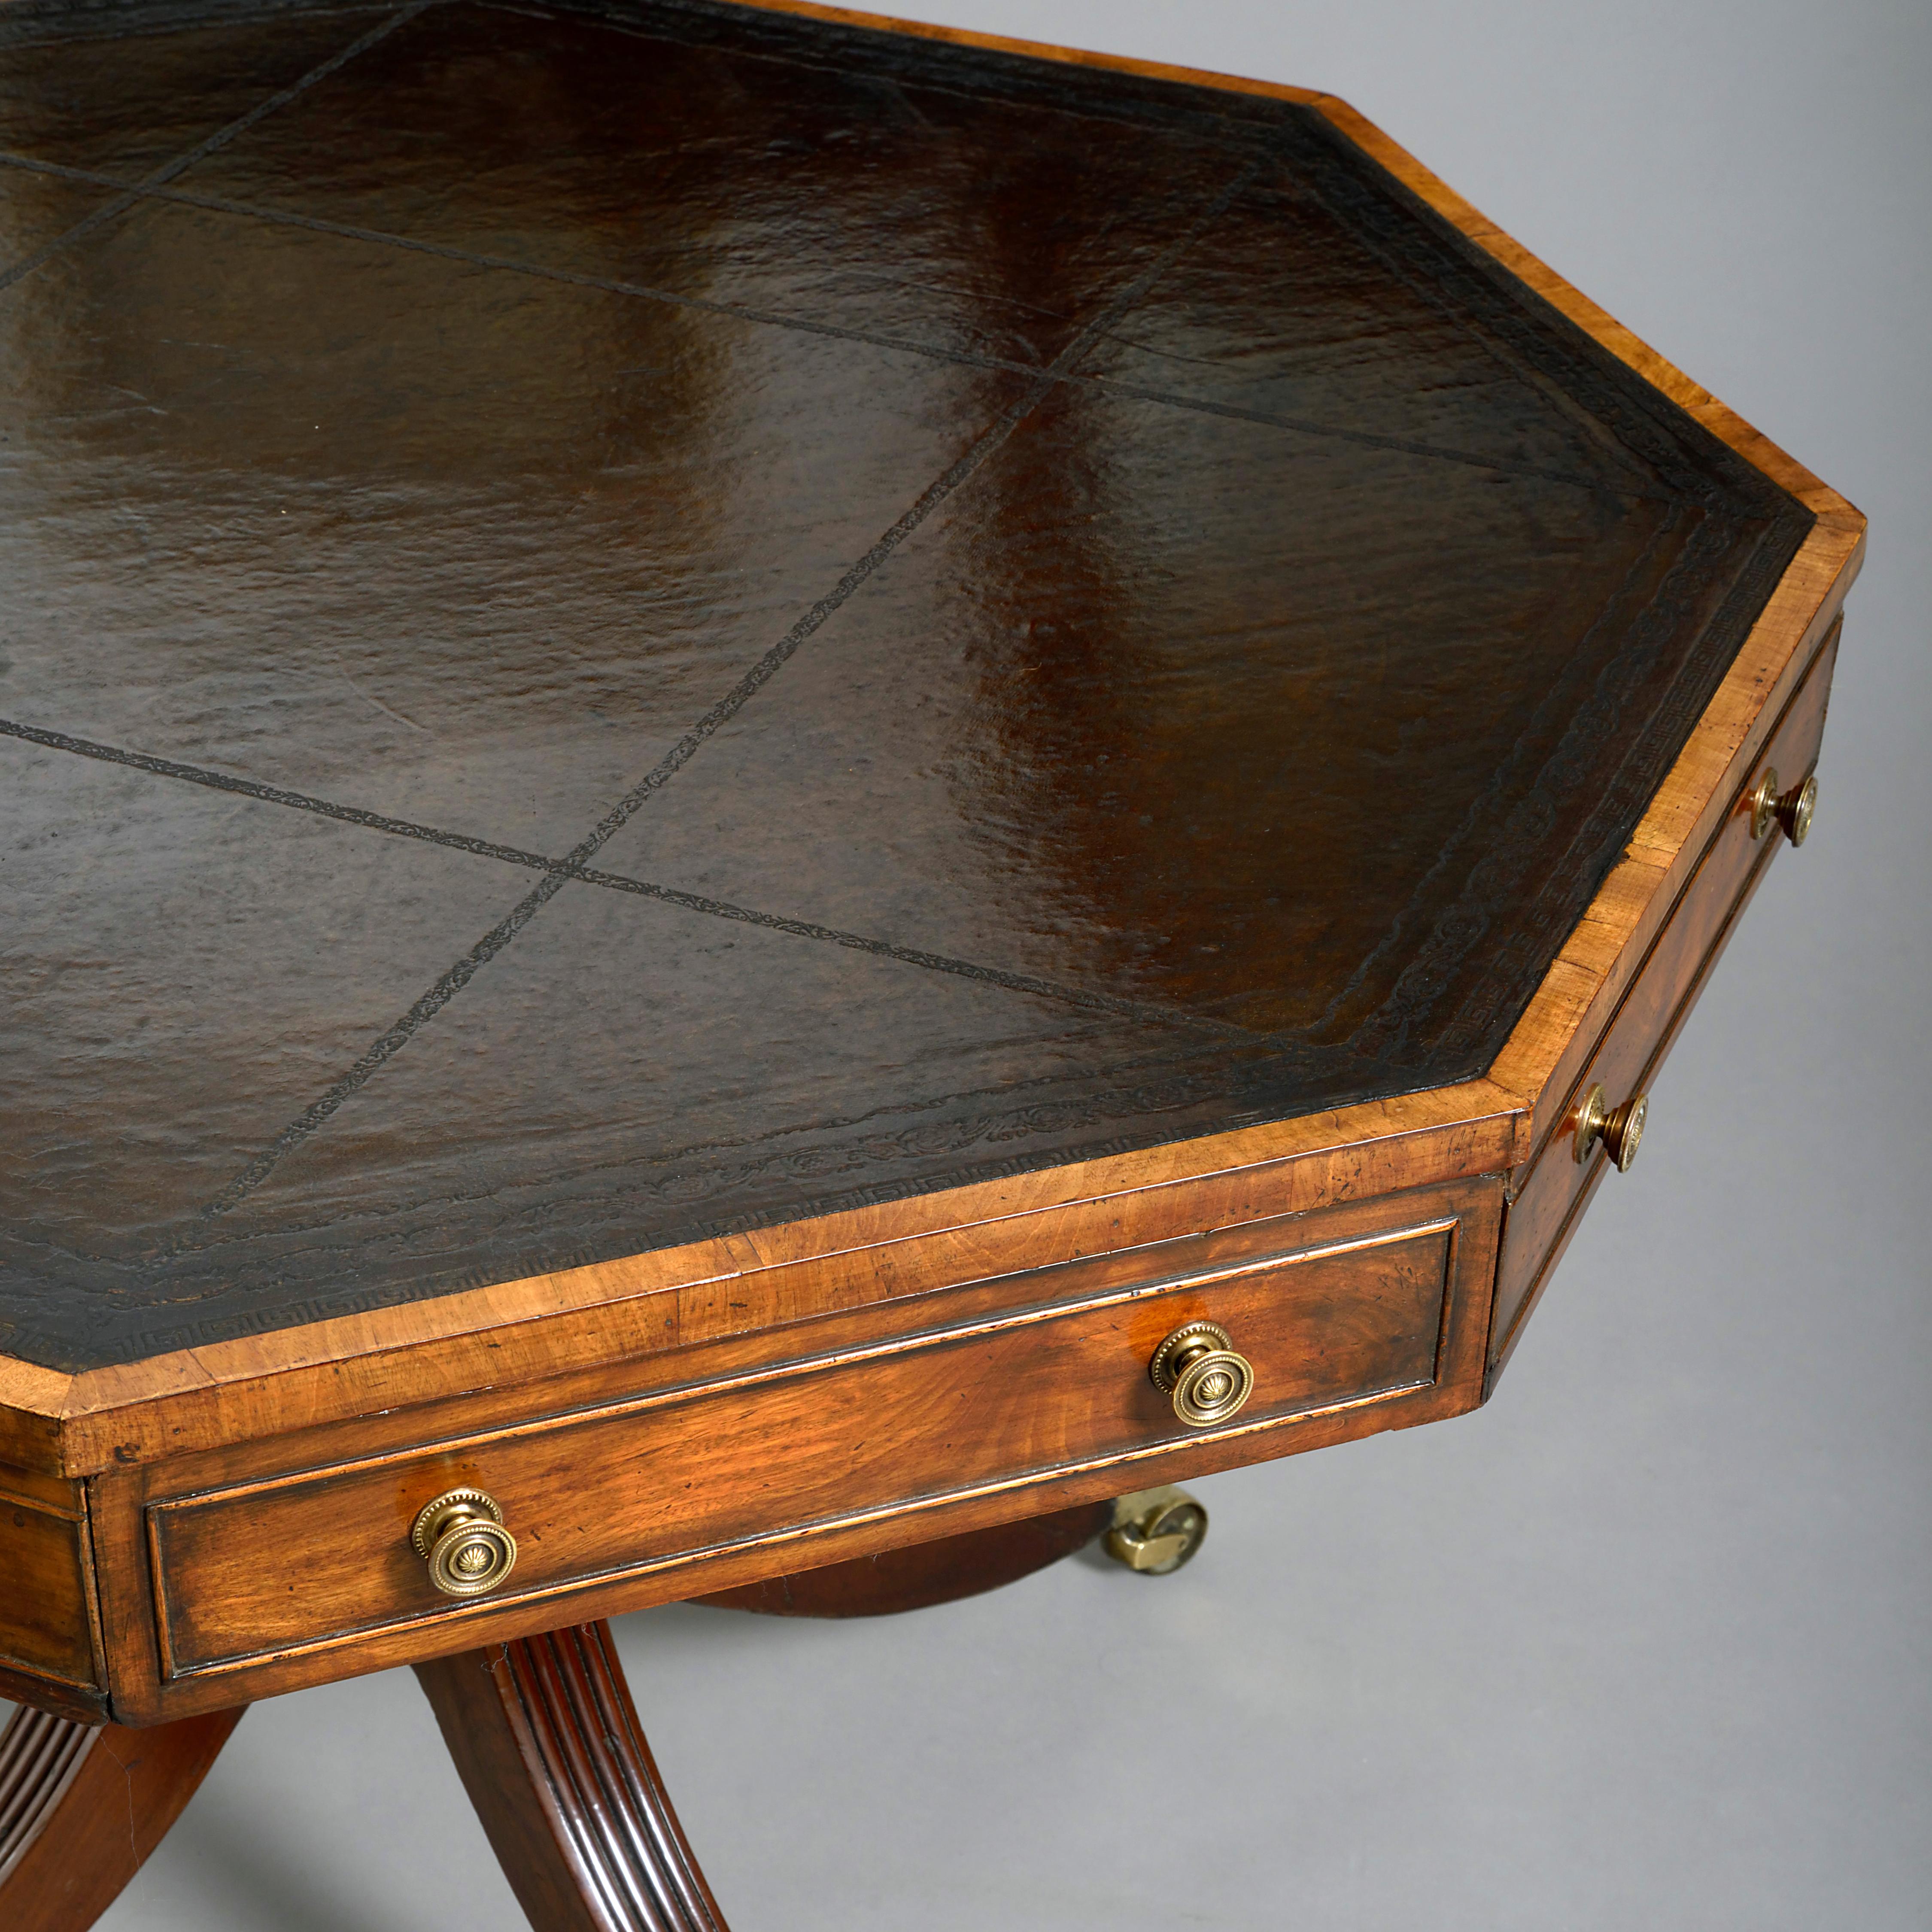 Embossed Early 19th Century George III Period Mahogany Rent Table